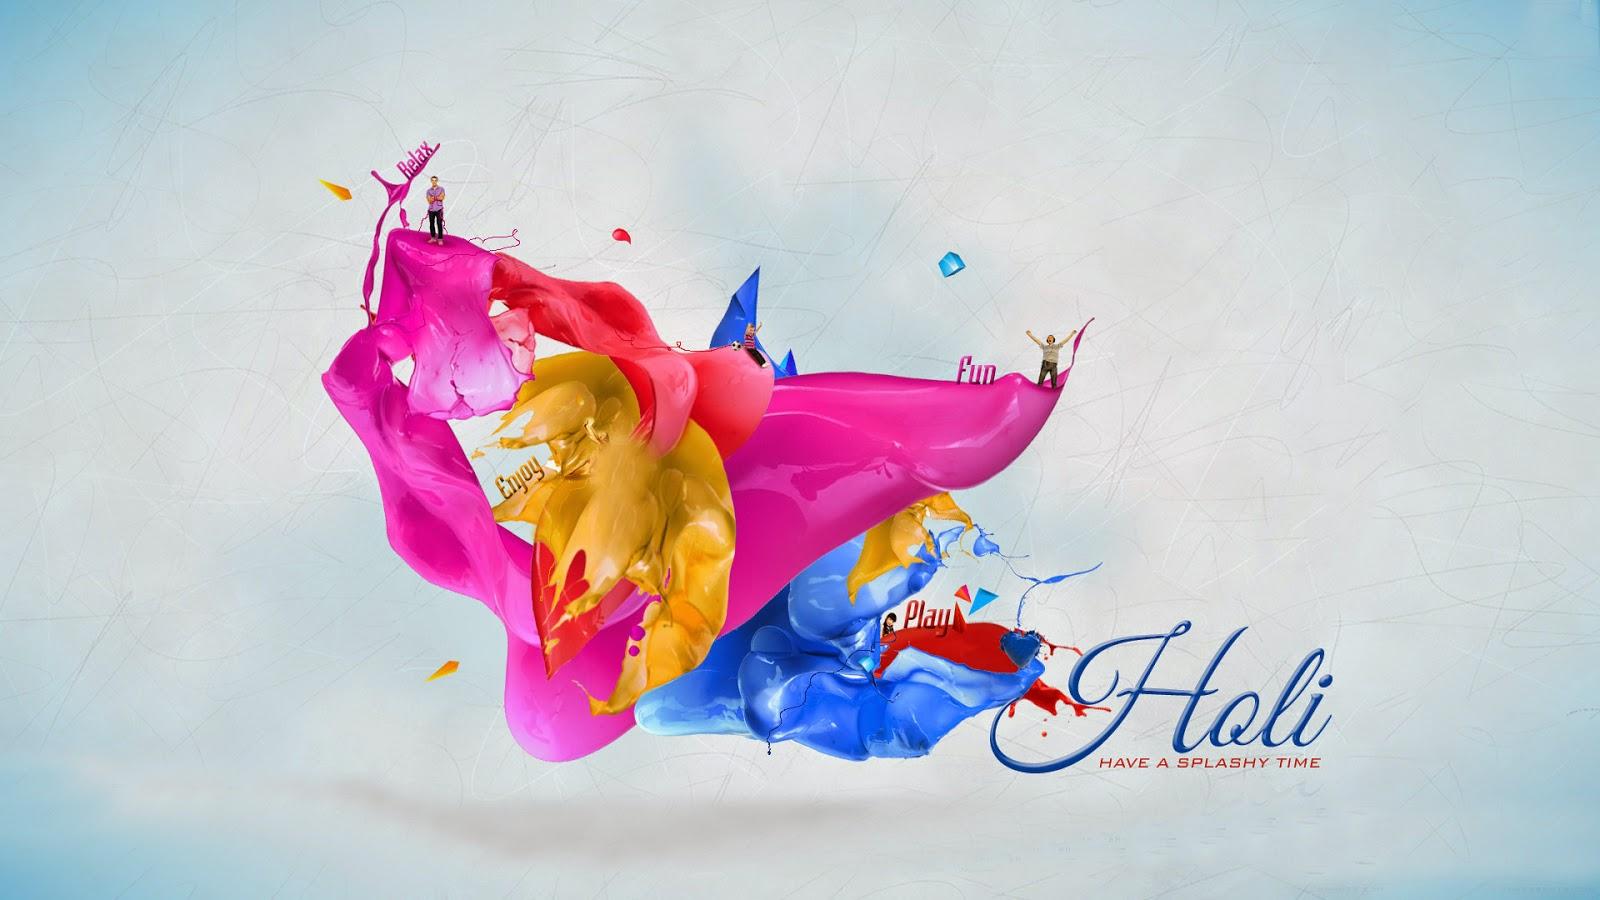 100+] Happy Holi Hd Background s | Wallpapers.com